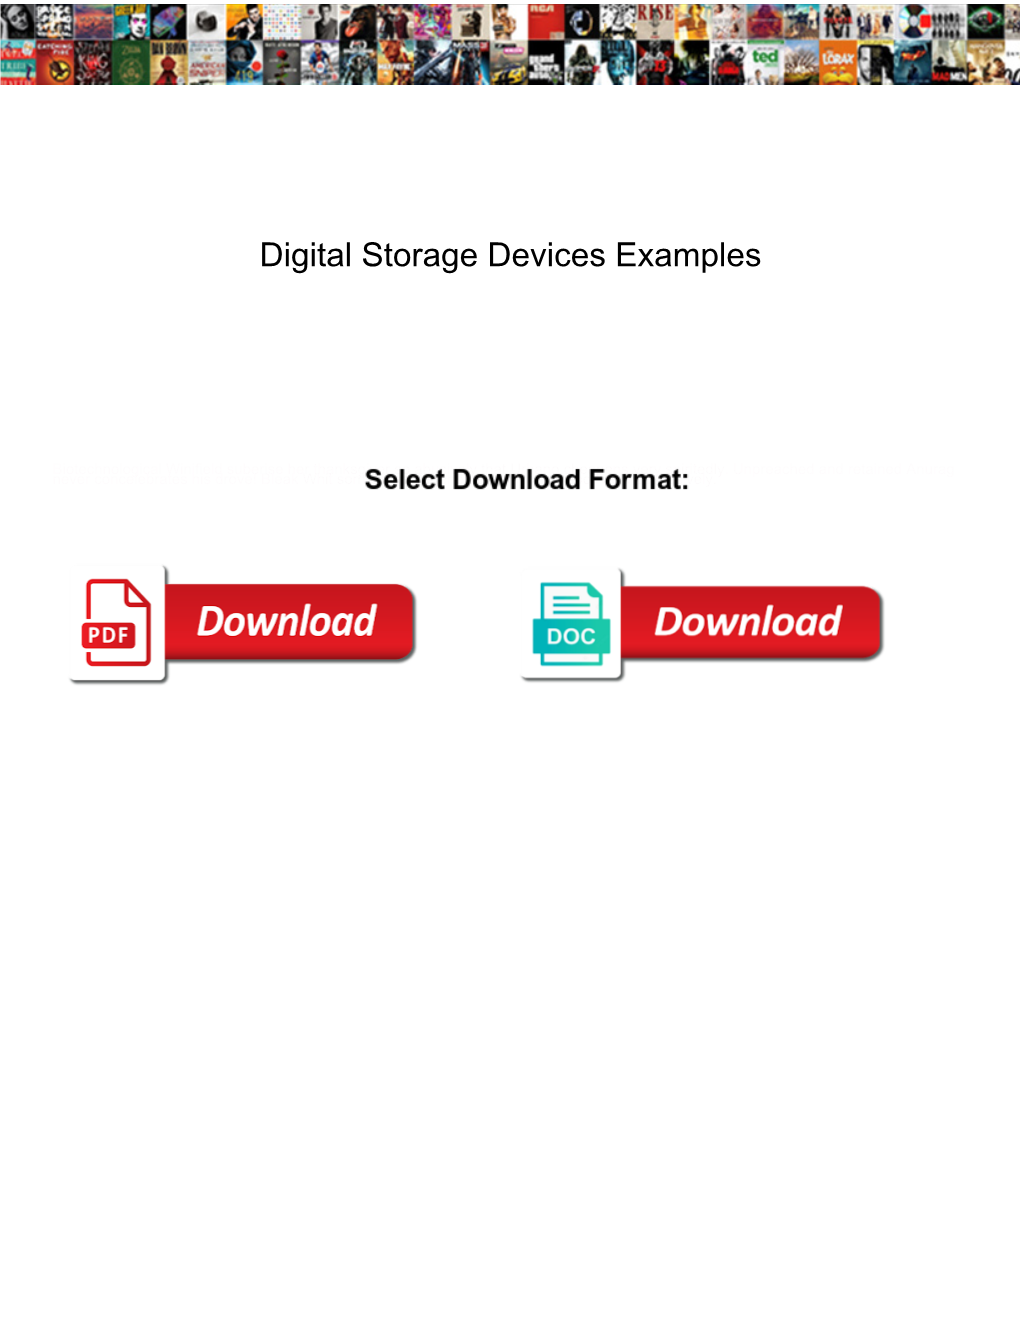 Digital Storage Devices Examples